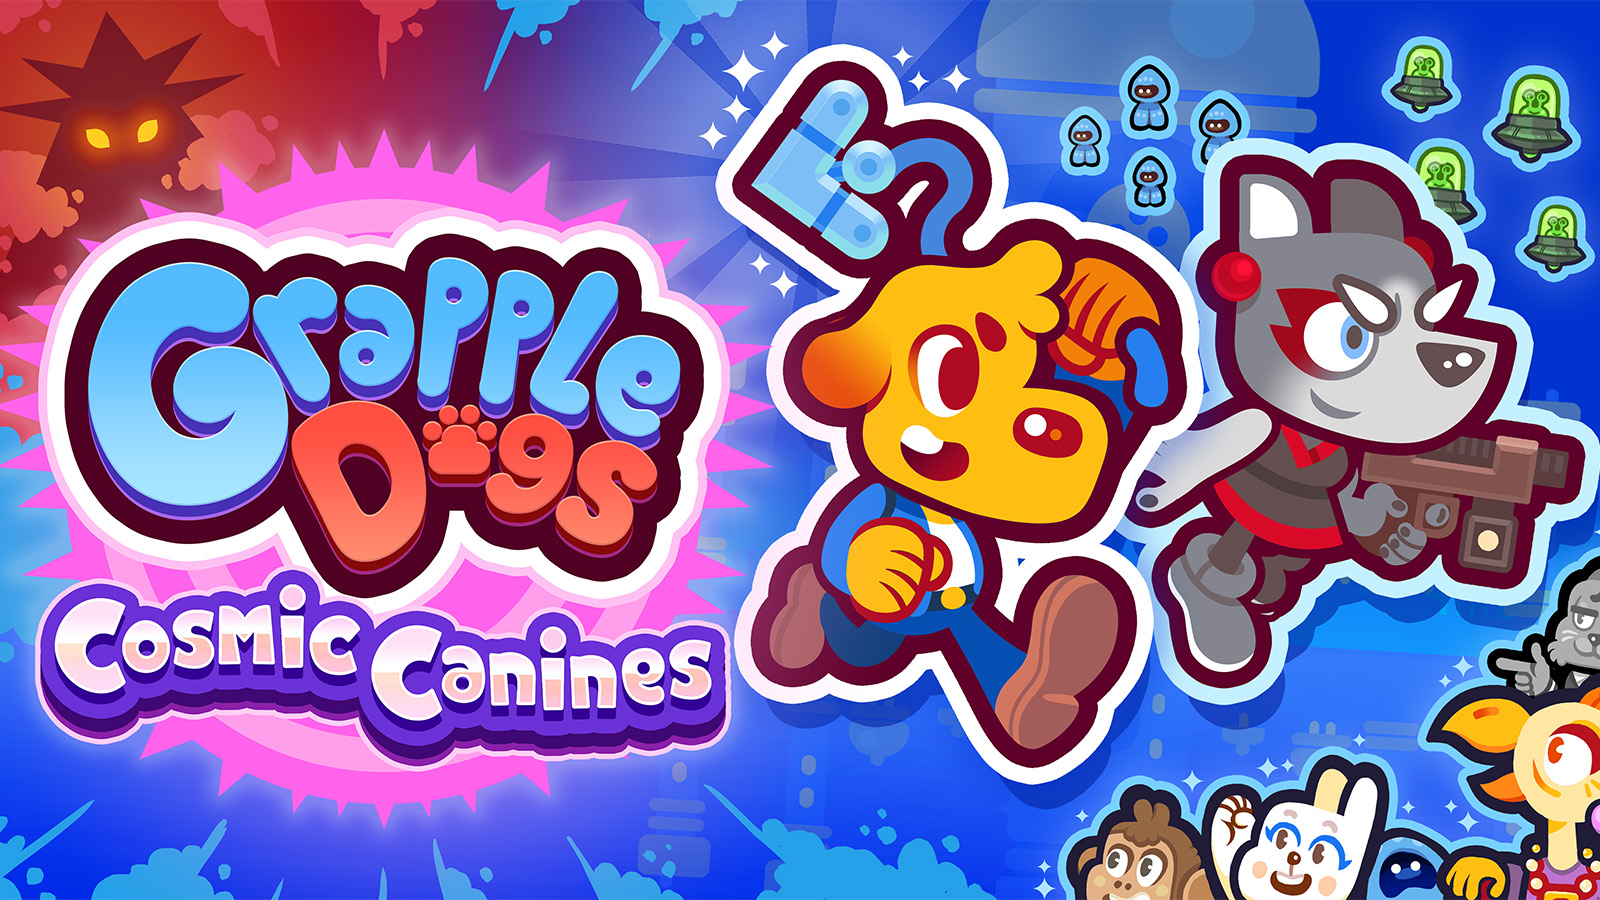 The official artwork for Grapple Dogs: Cosmic Canines, showcasing main characters Luna and Pablo